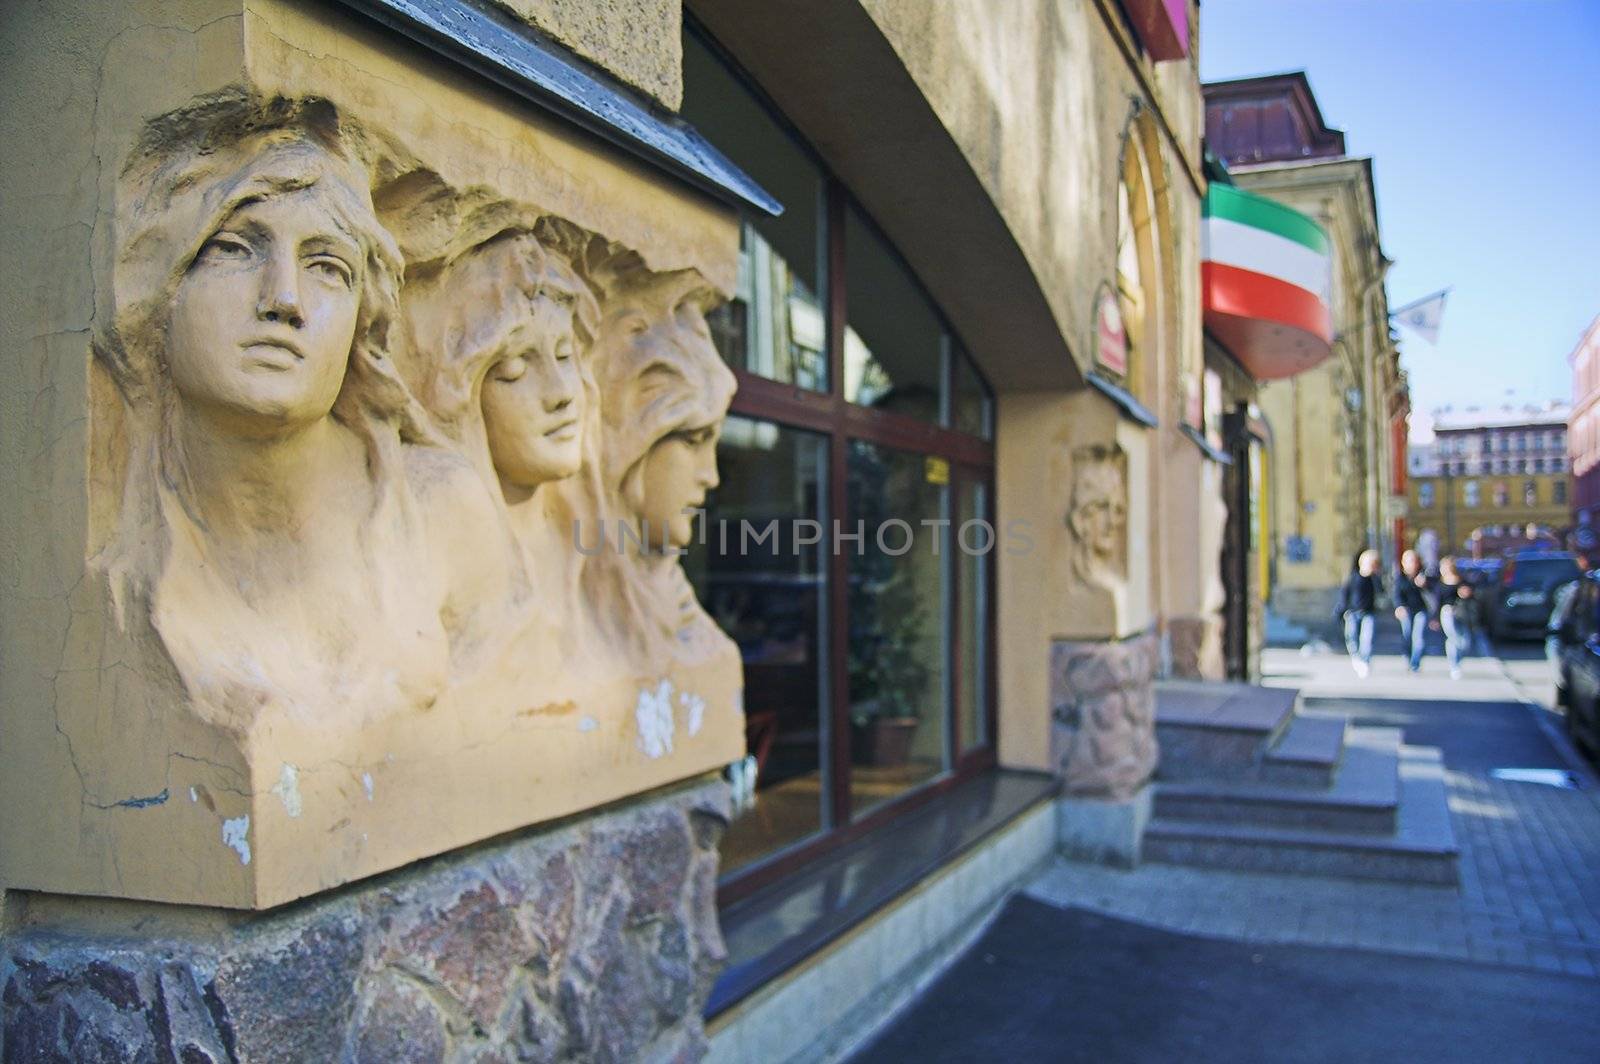 Entrance to cafe in city street with a group of people in background. The building was built before 1900, and the sculptures on the facade are public monuments and nobody can have copyright on them.